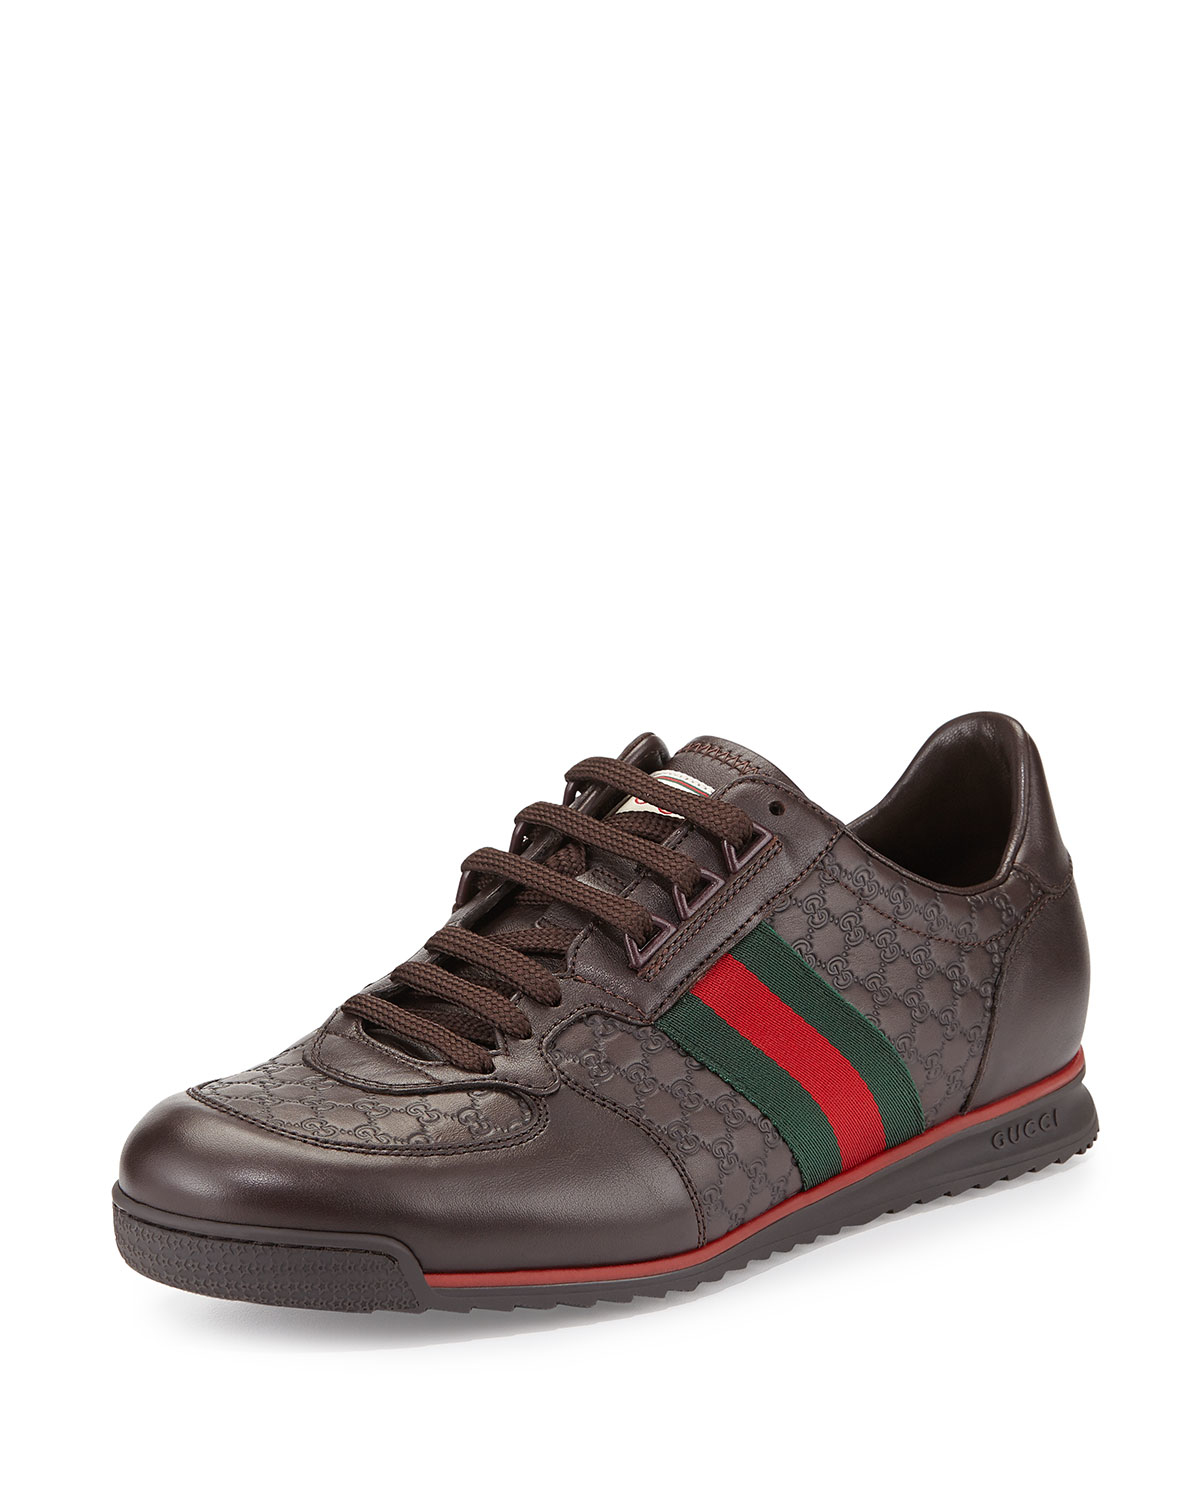 Lyst - Gucci Low-Top Webbed Sneakers in Brown for Men